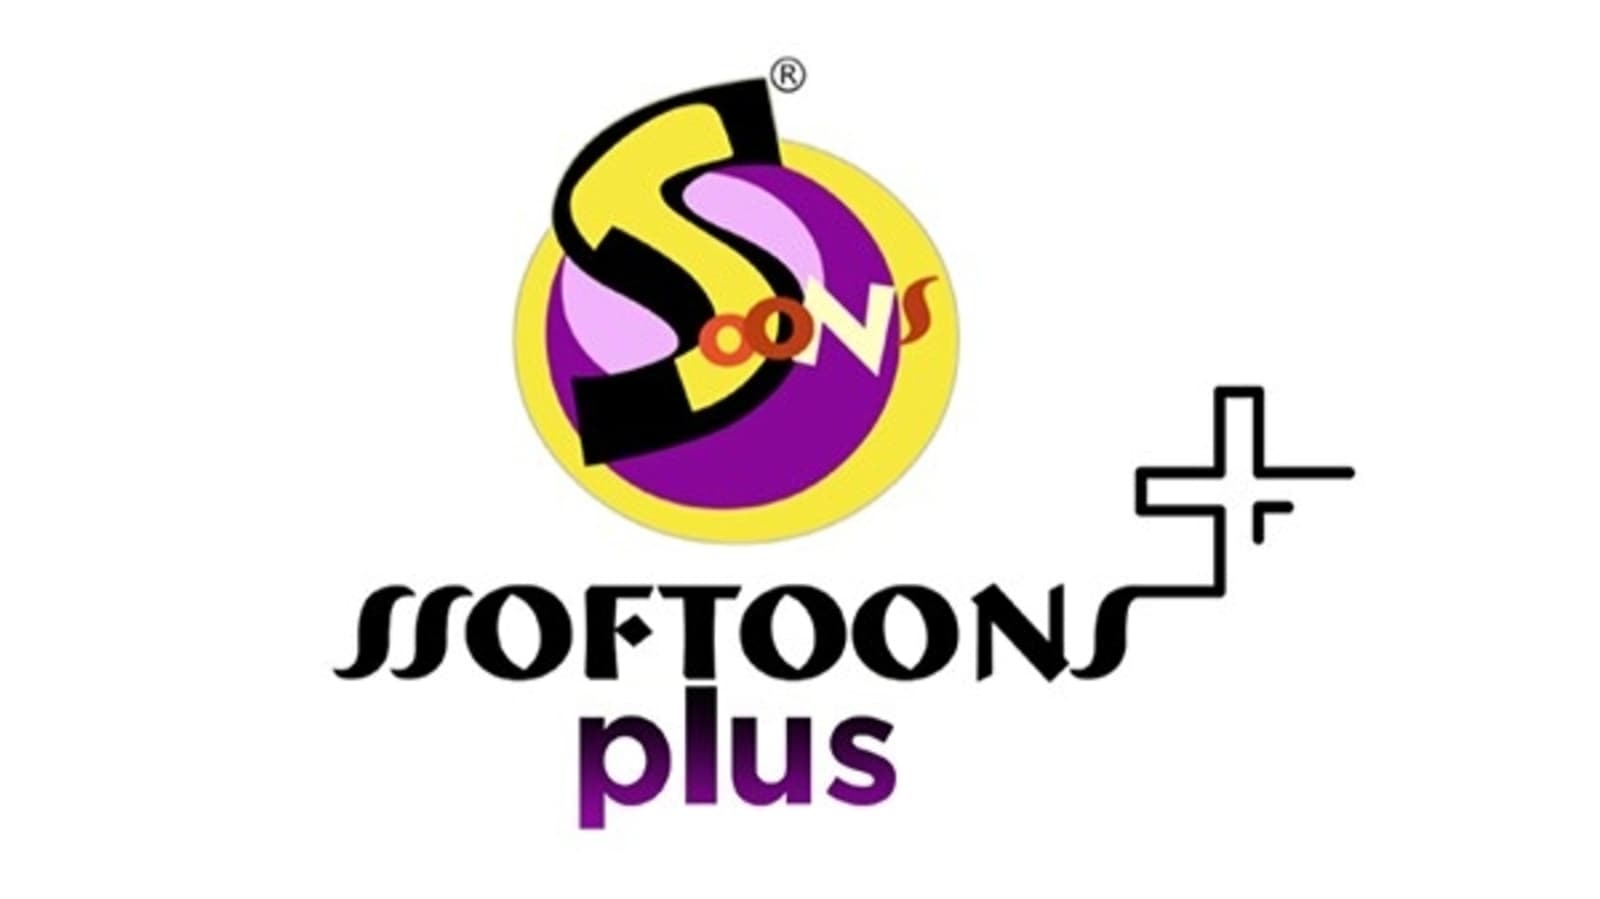 Ssoftoons launches India's first Animation for All OTT Platform,  SSOFTOONSPLUS - Hindustan Times